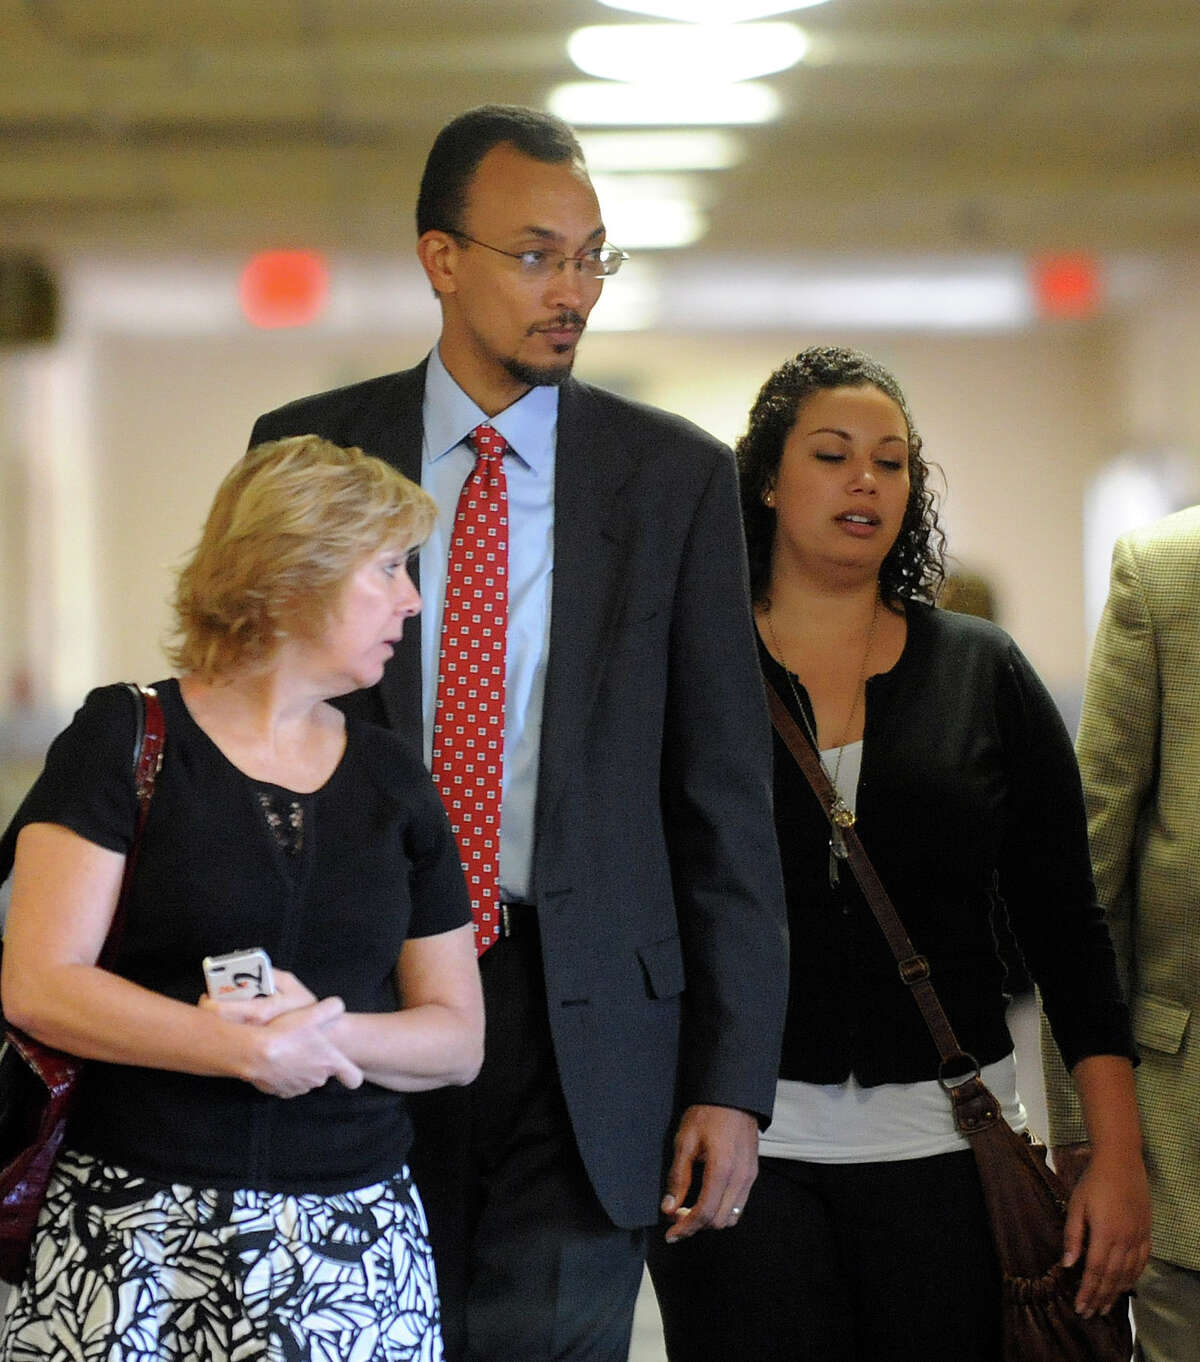 Anesthesiologist Dr. Brian Seastrunk, wearing tie, enters 37th District Court for a malpractice trial on Friday, Sept. 21, 2012. Attorneys for the parents of Maddoux Cordova, a 22-month-old boy who died after being given morphine upon Seastrunk's approval, argue that Seastrunk's decision led to the boy's death in 2009.